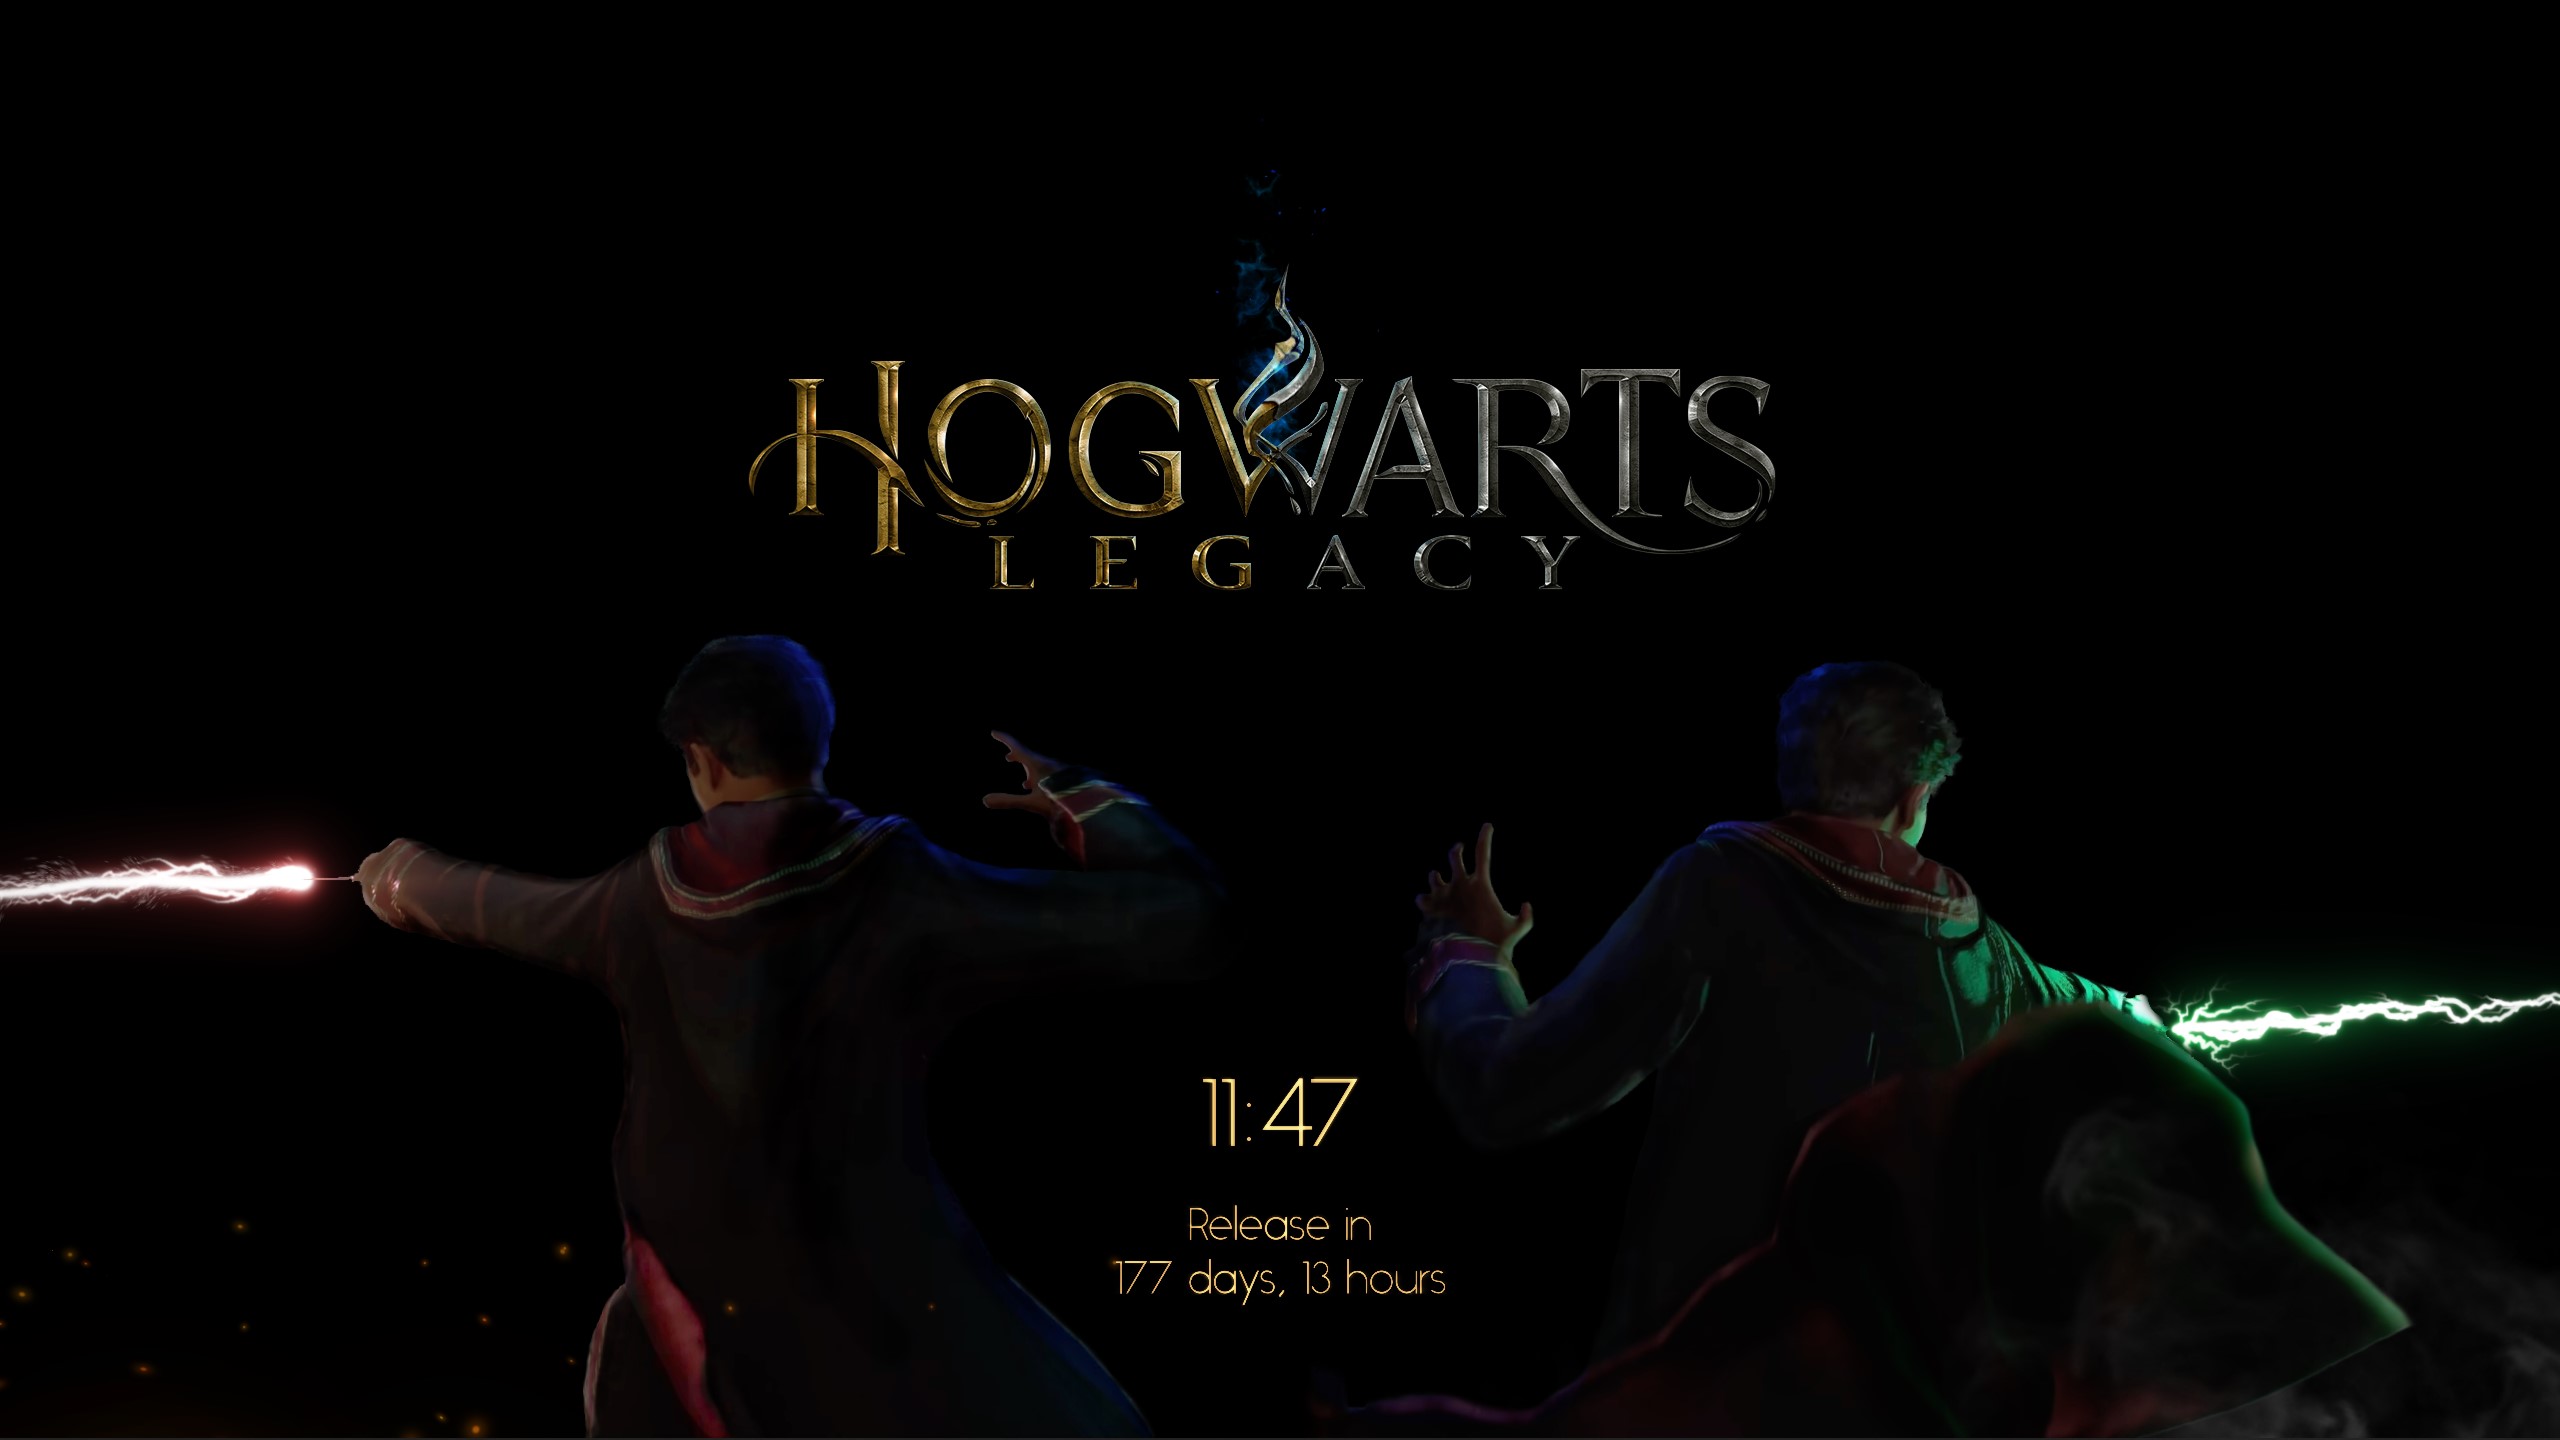 Hogwarts Legacy Wallpaper (with release countdown, Wallpaper Engine, 2560x1440). Might put a 21:9 version in the workshop soon. Hope you enjoy!